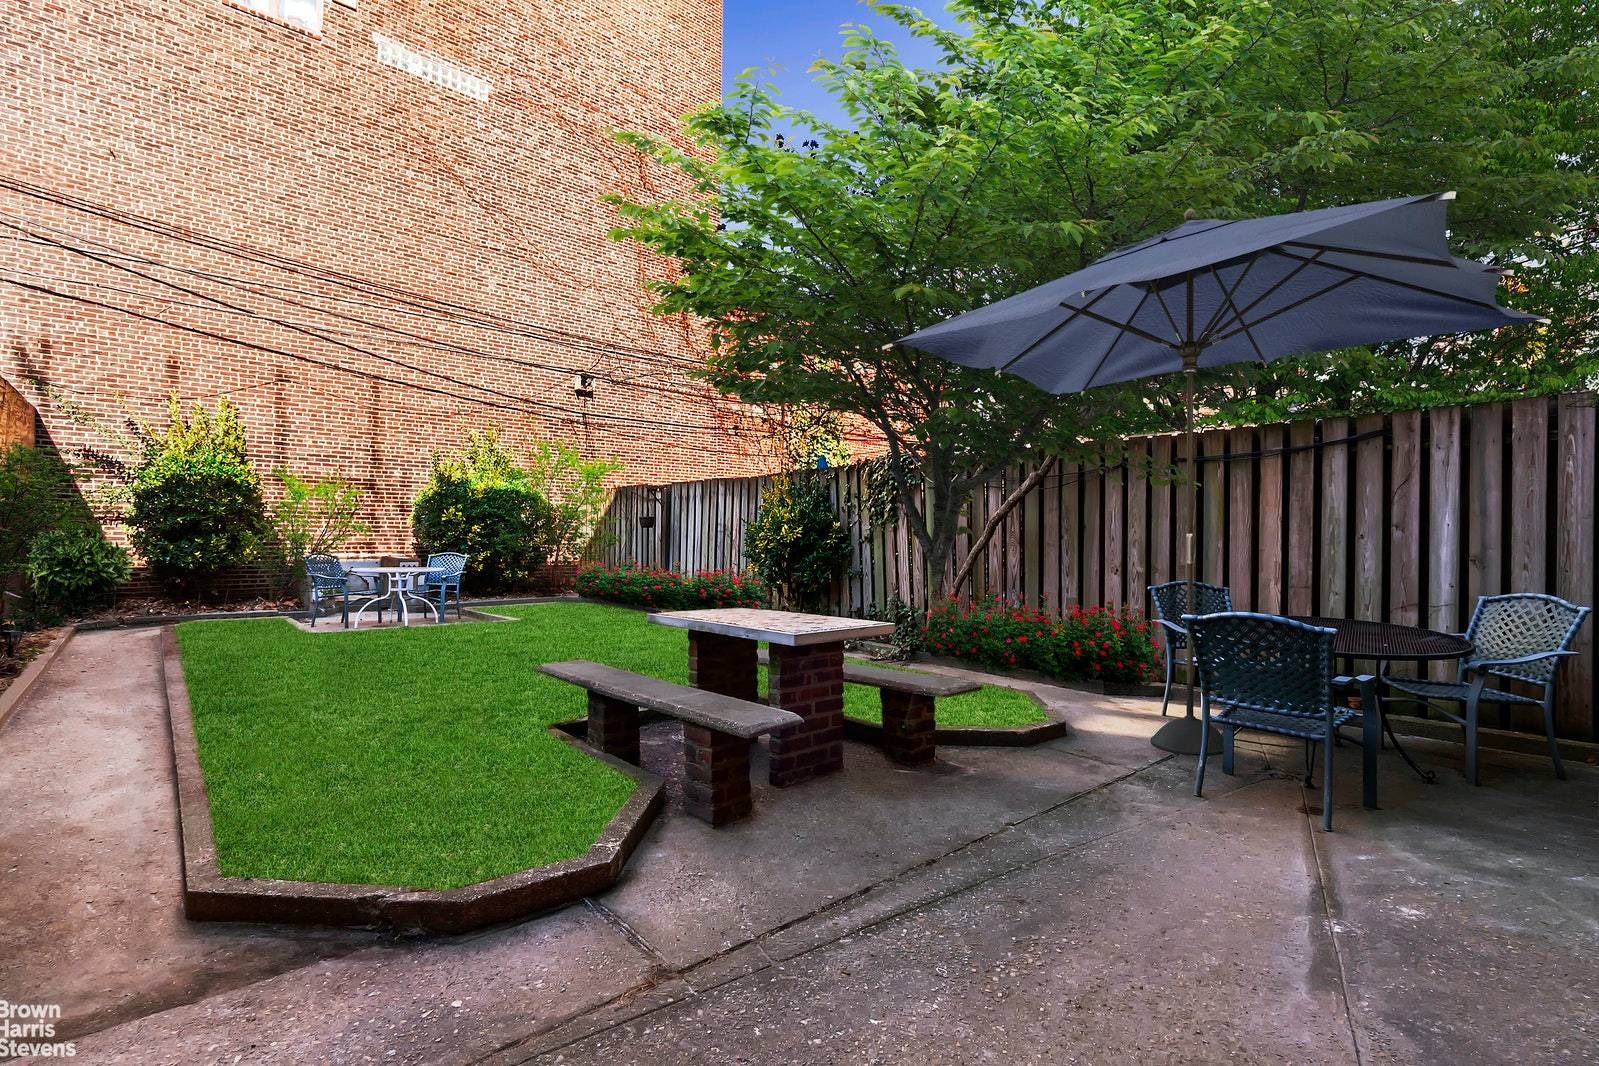 Brownstone living at its best in this 3 bedroom 1 bath apartment which offers a remarkable indoor outdoor lifestyle.